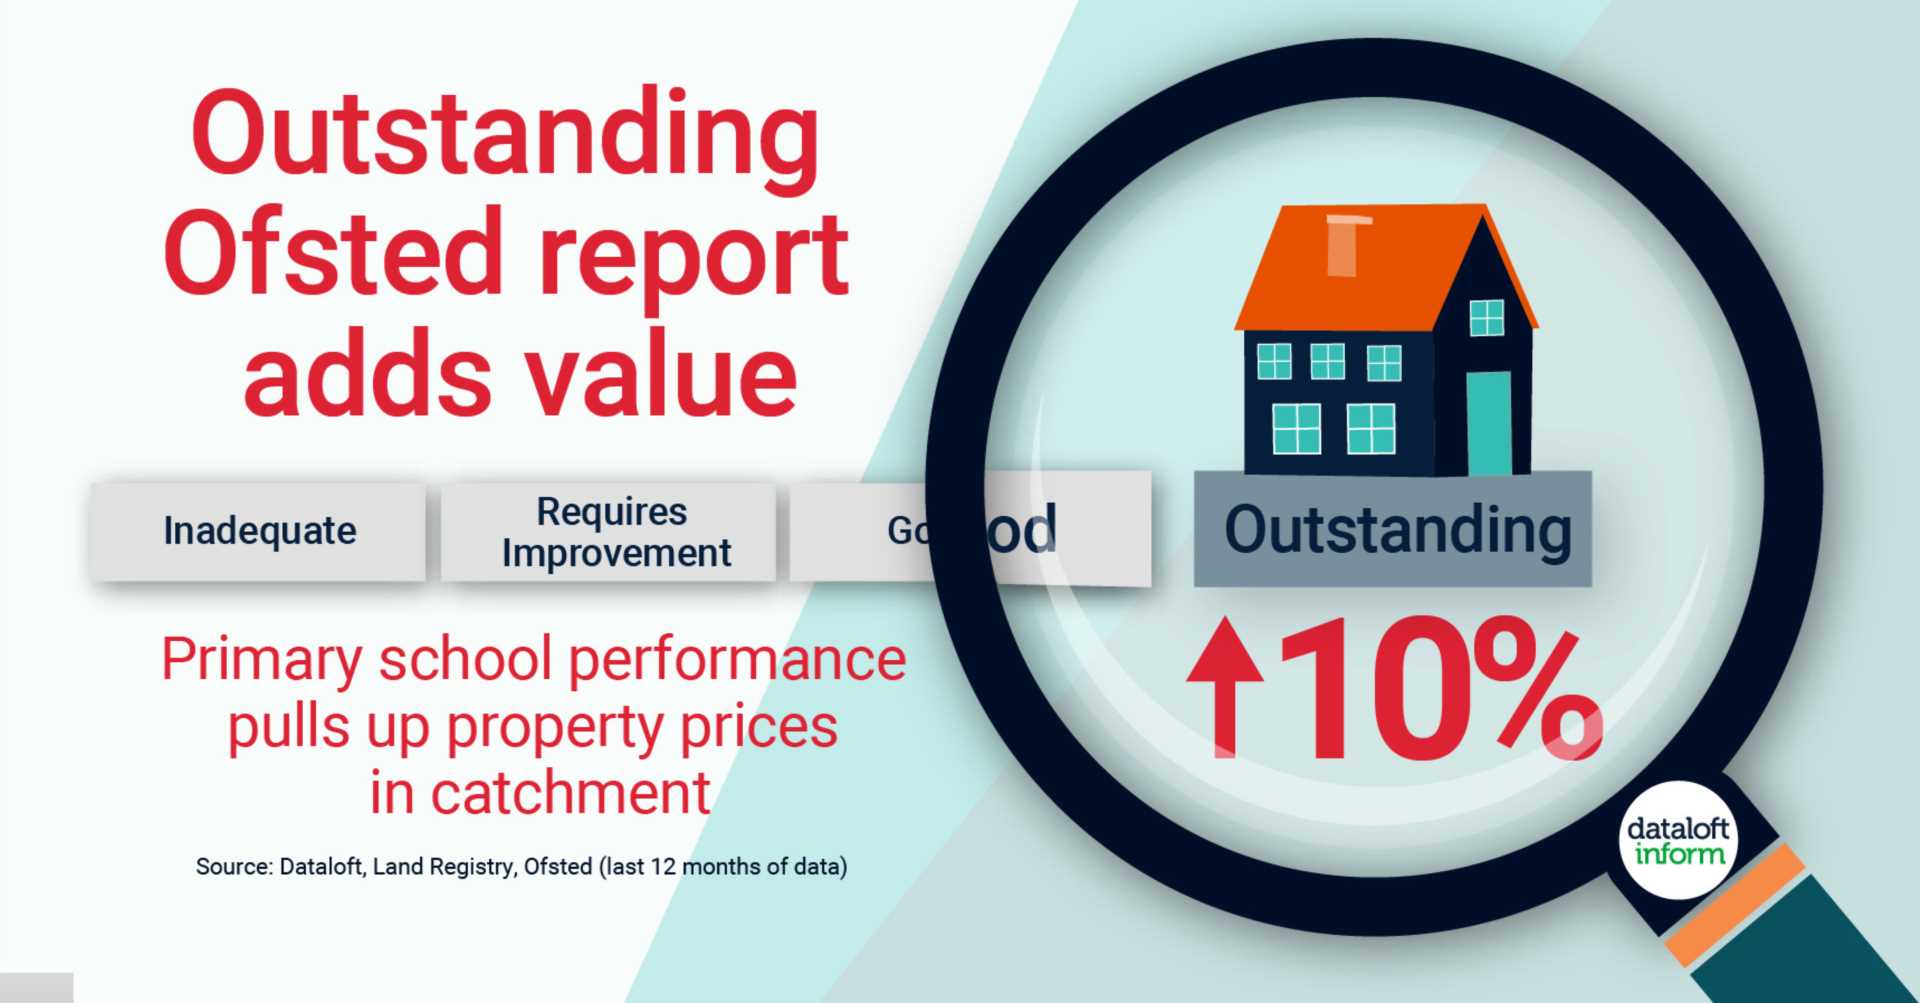 Outstanding Ofsted report adds value